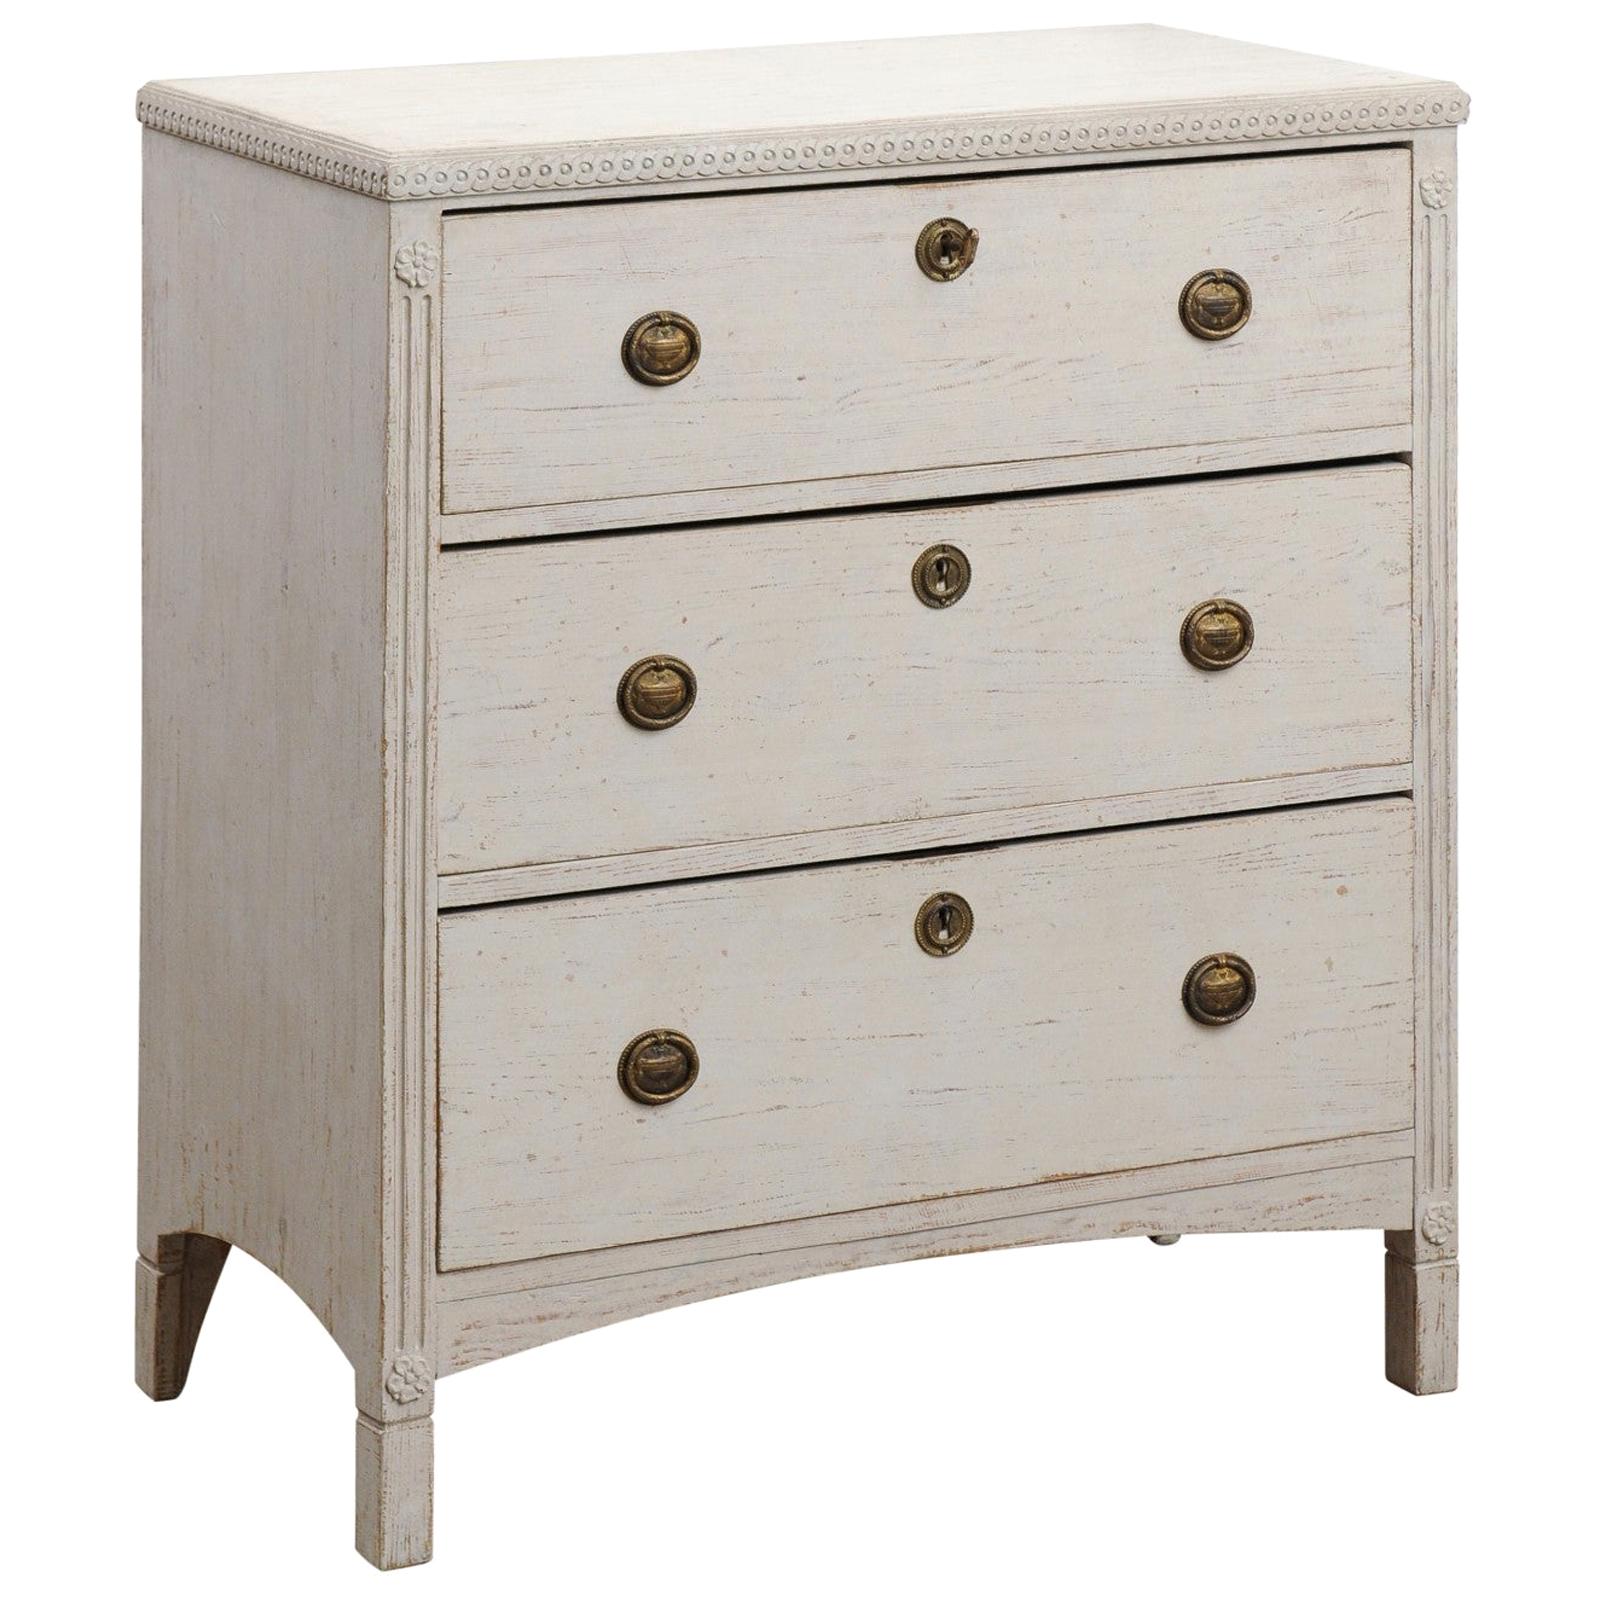 Swedish 19th Century Gustavian Style Painted Three-Drawer Chest with Guilloches